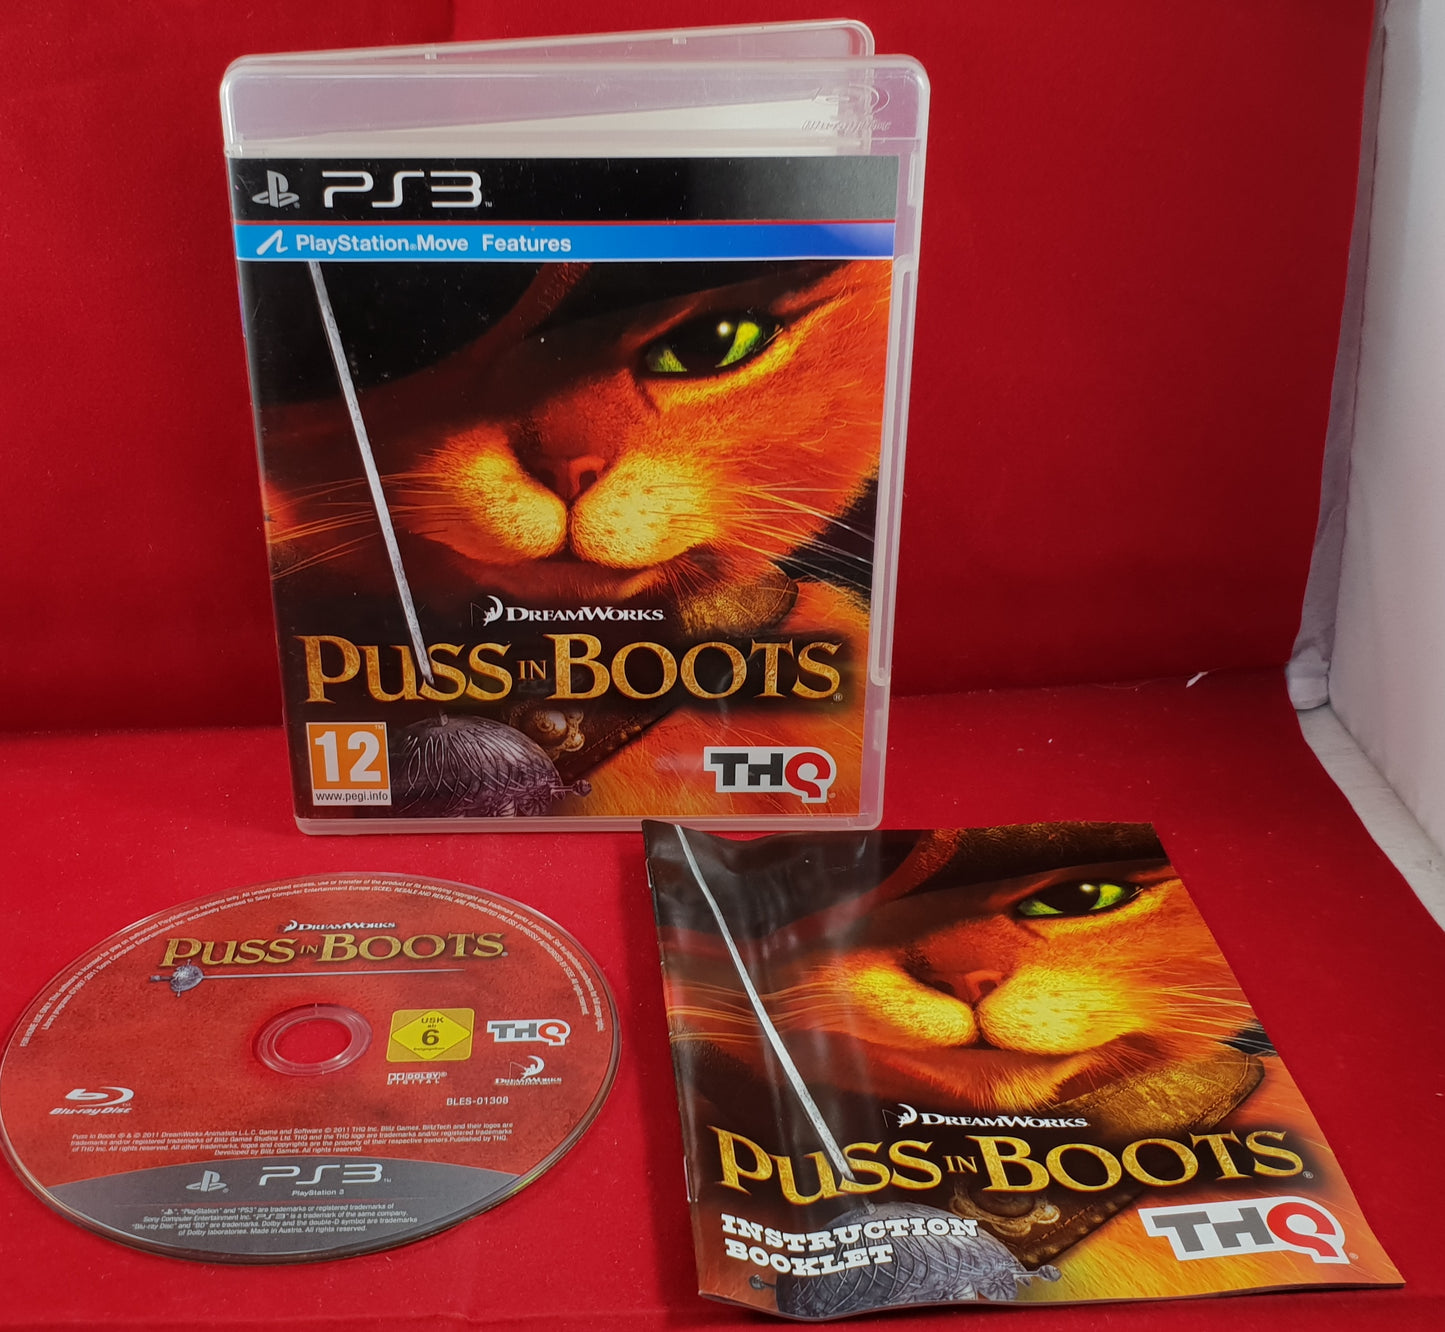 Puss in Boots Sony Playstation 3 (PS3) Game